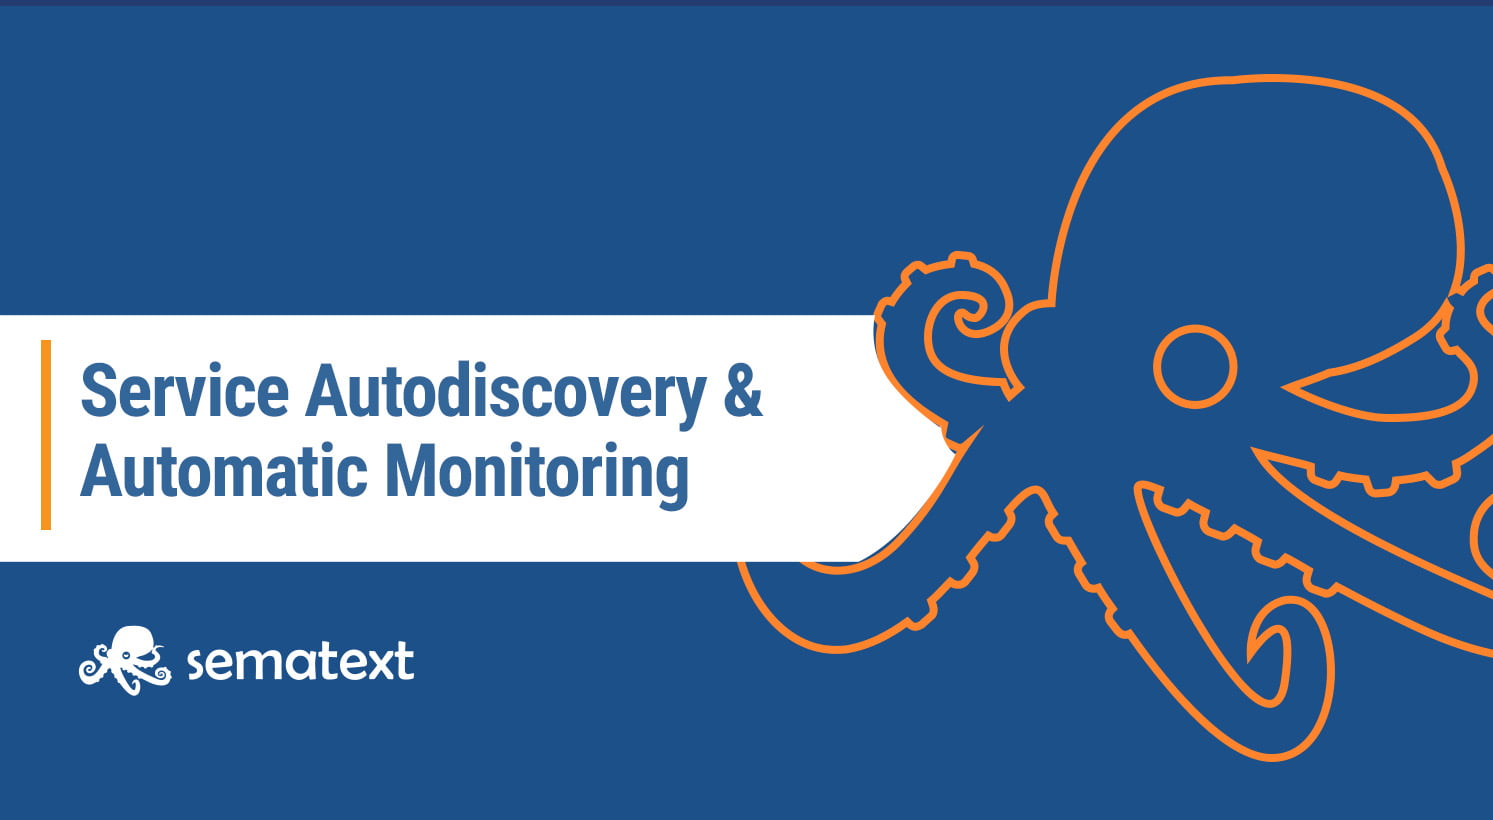 Service Autodiscovery & Automatic Monitoring with Sematext